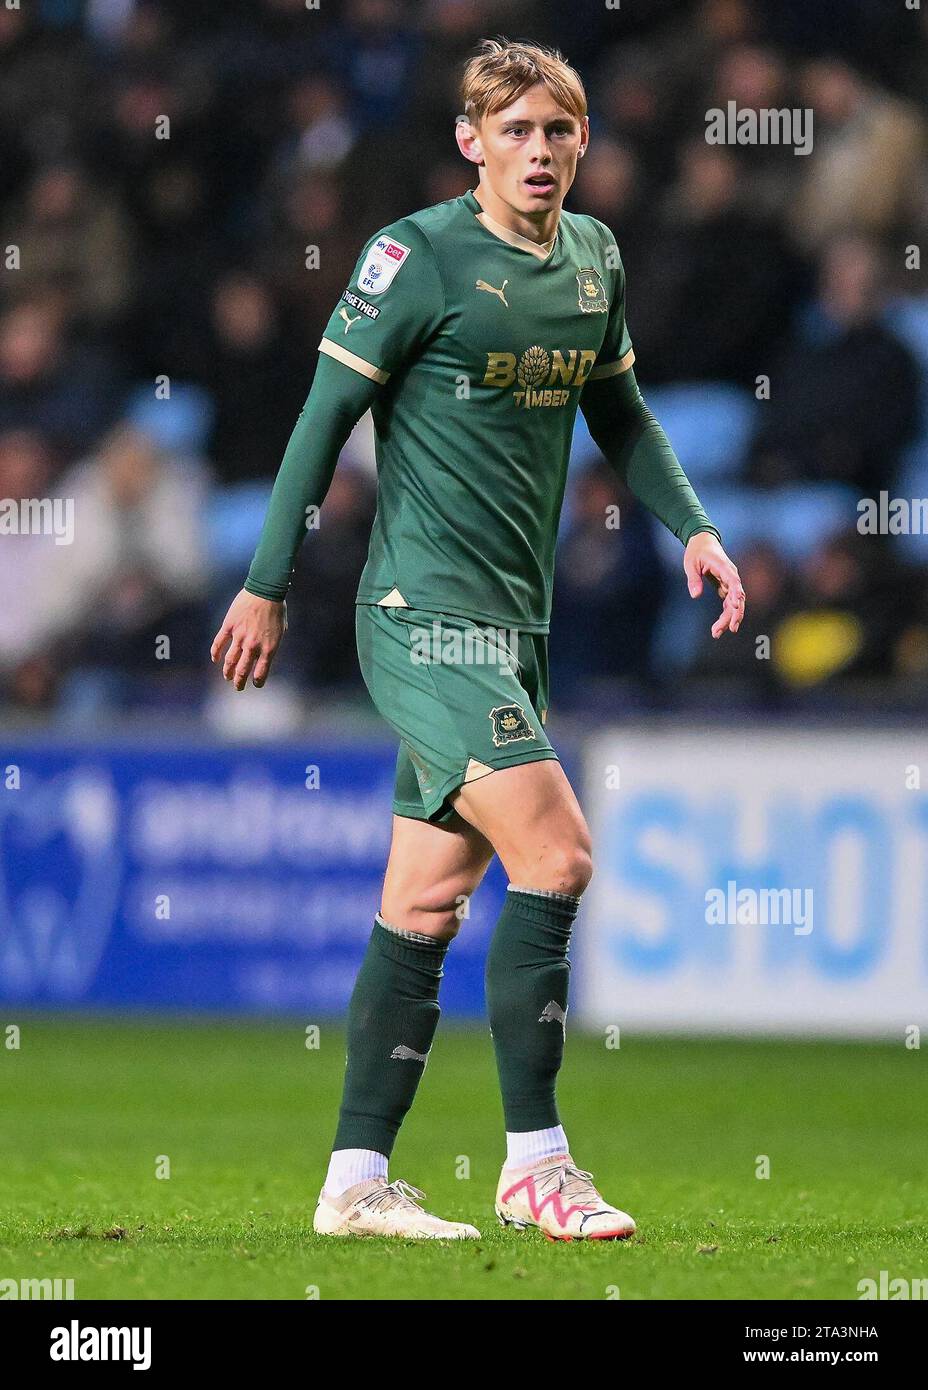 Ben Waine #23 of Plymouth Argyle /iua/ during the Sky Bet Championship match Coventry City vs Plymouth Argyle at Coventry Building Society Arena, Coventry, United Kingdom, 28th November 2023 (Photo by Stan Kasala/News Images) in, on 11/28/2023. (Photo by Stan Kasala/News Images/Sipa USA) Credit: Sipa USA/Alamy Live News Stock Photo